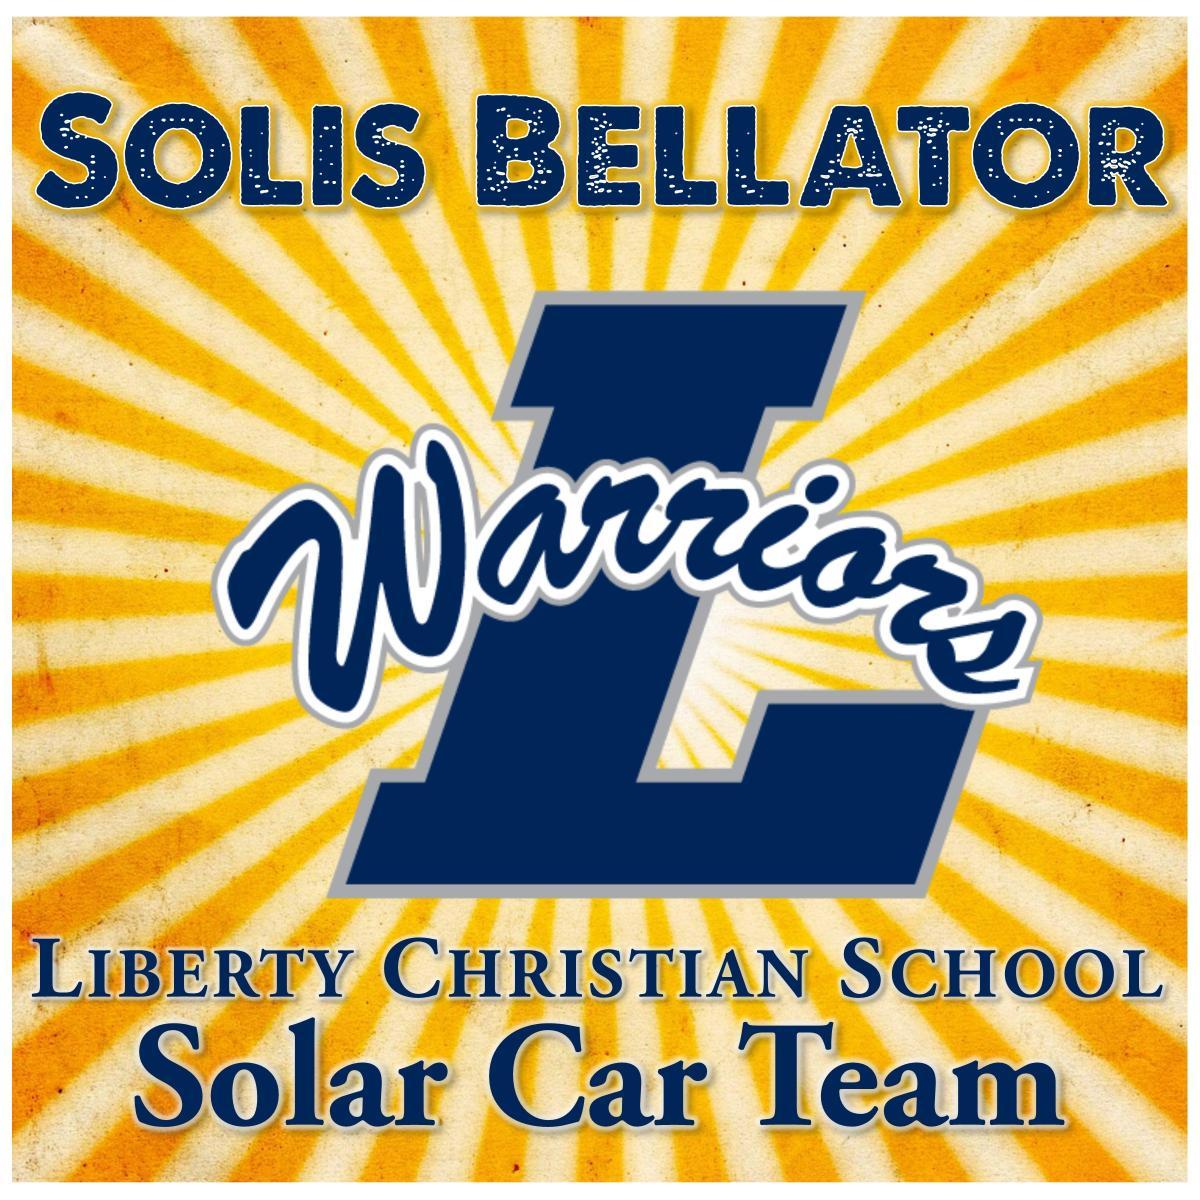 The Solar Car Team of Liberty Christian School racing from DFW to LA in 2018